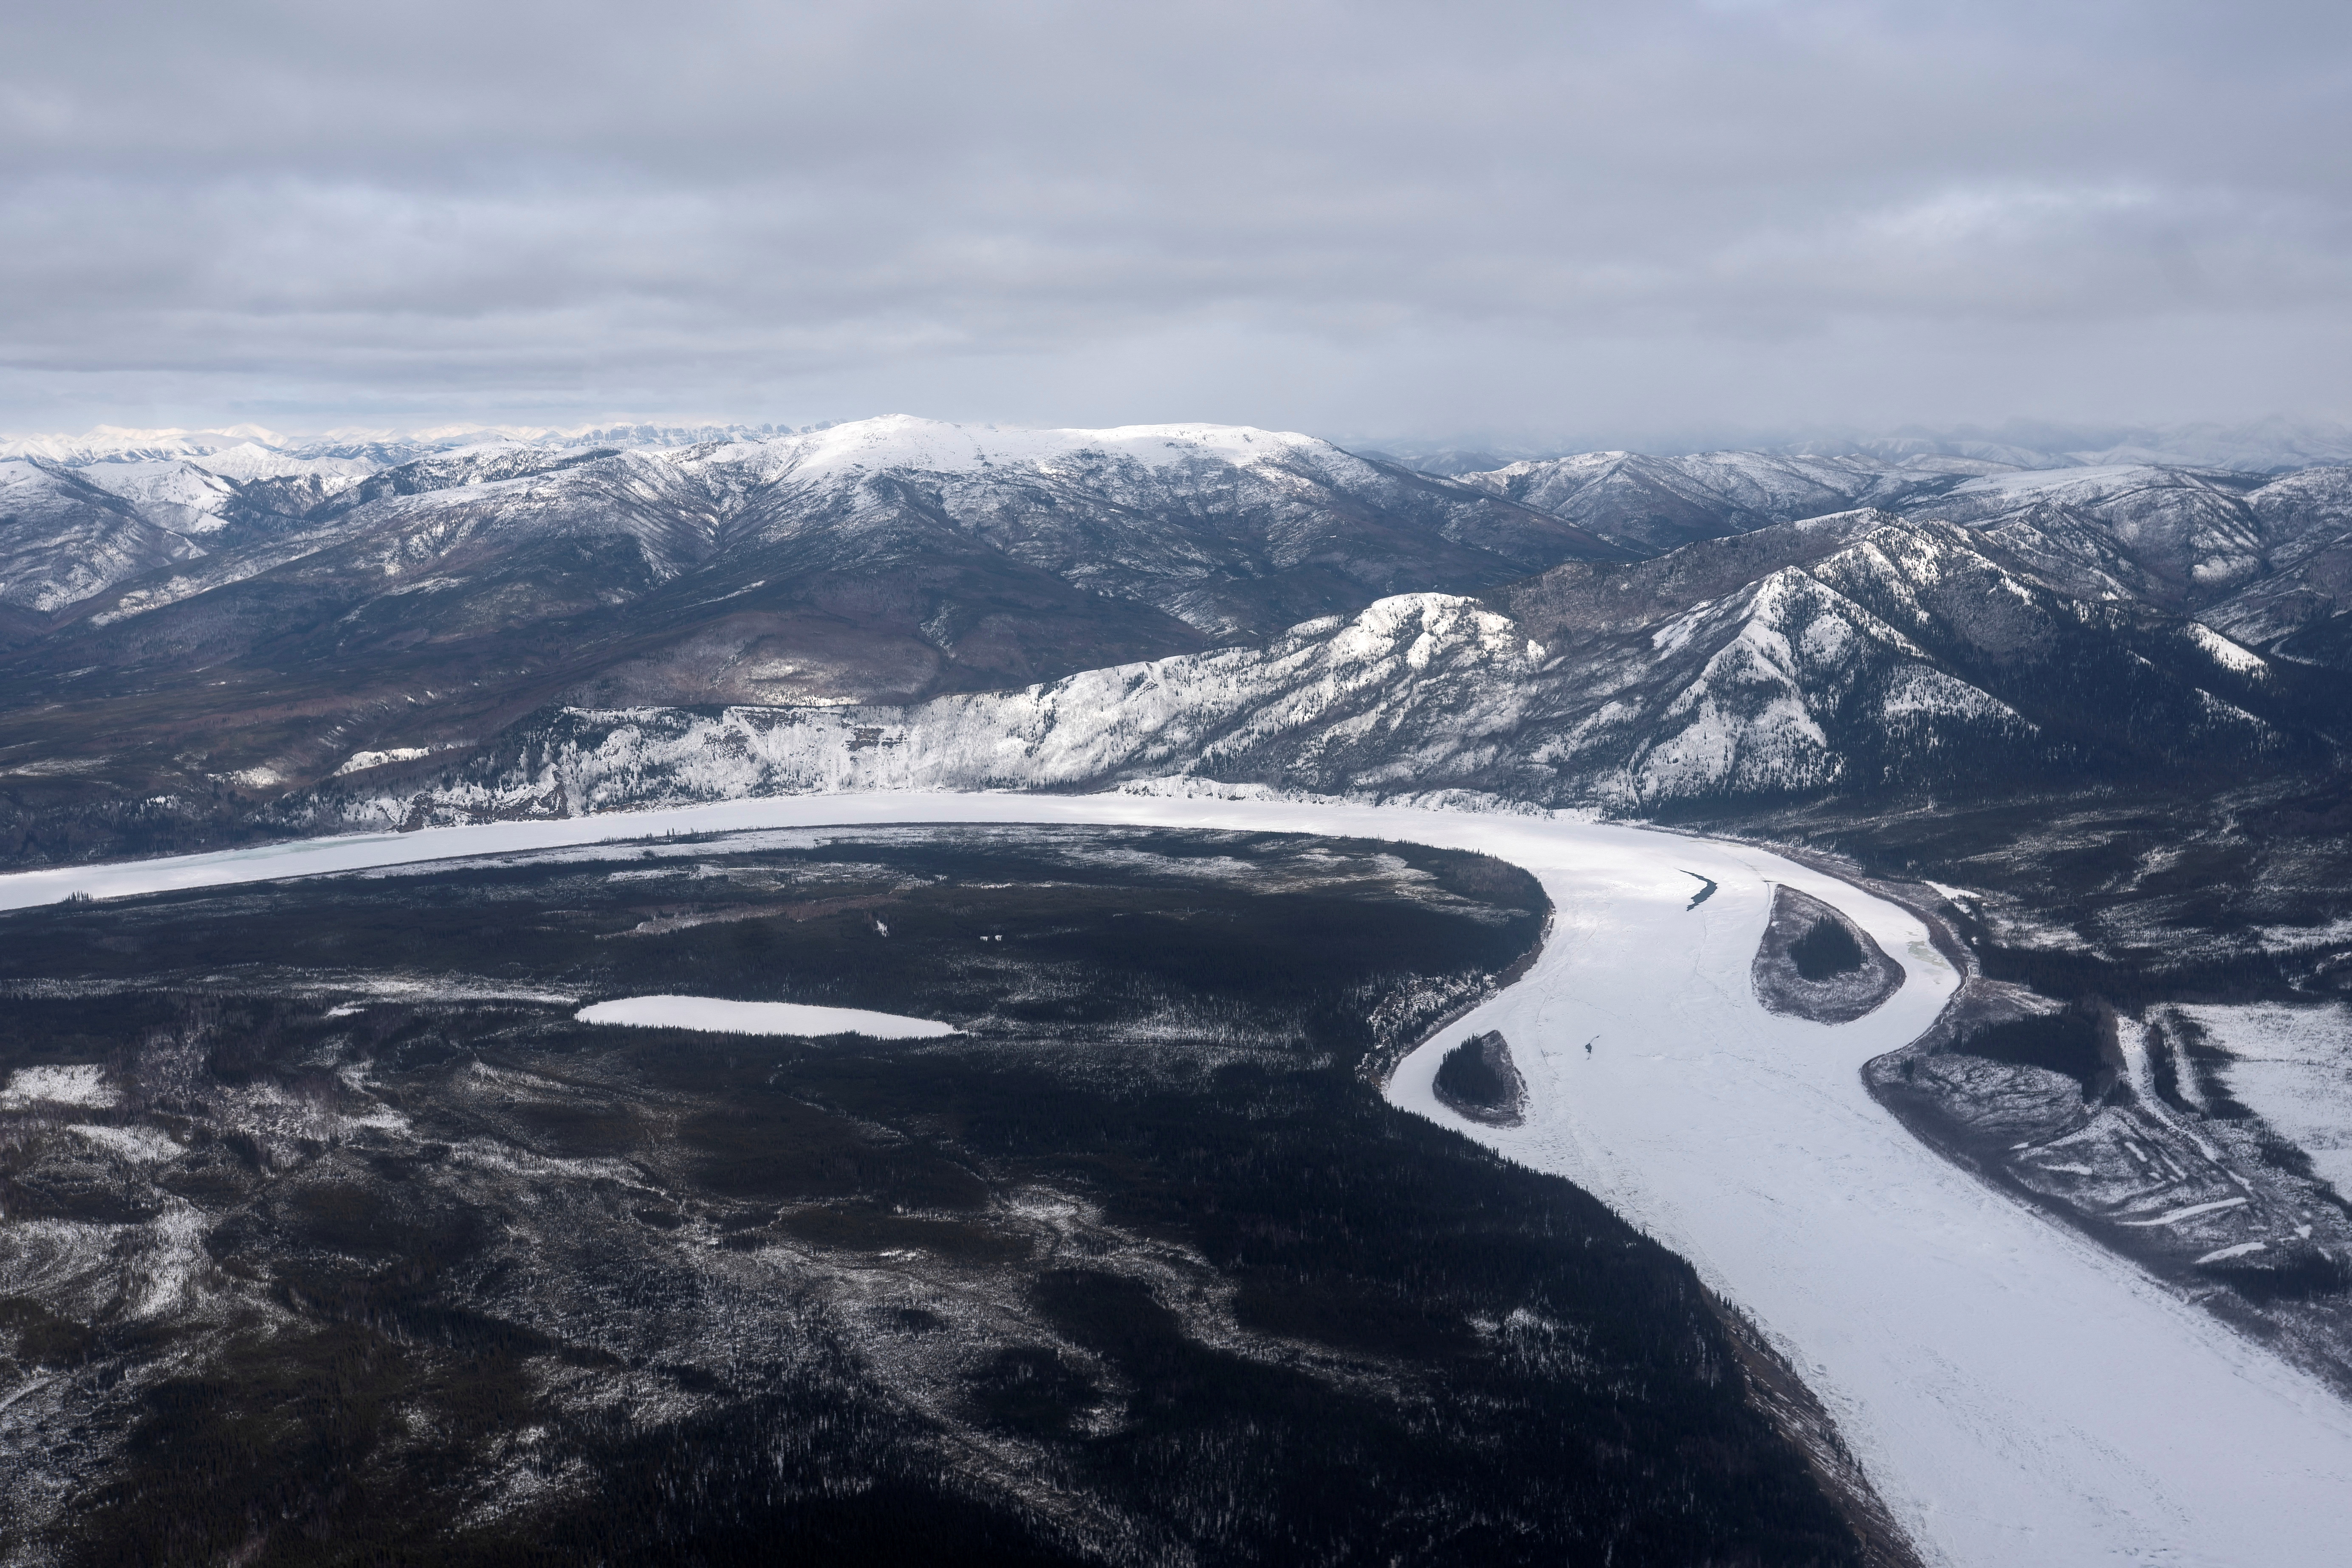 A view of the Yukon River near the Canadian border and Eagle, Alaska